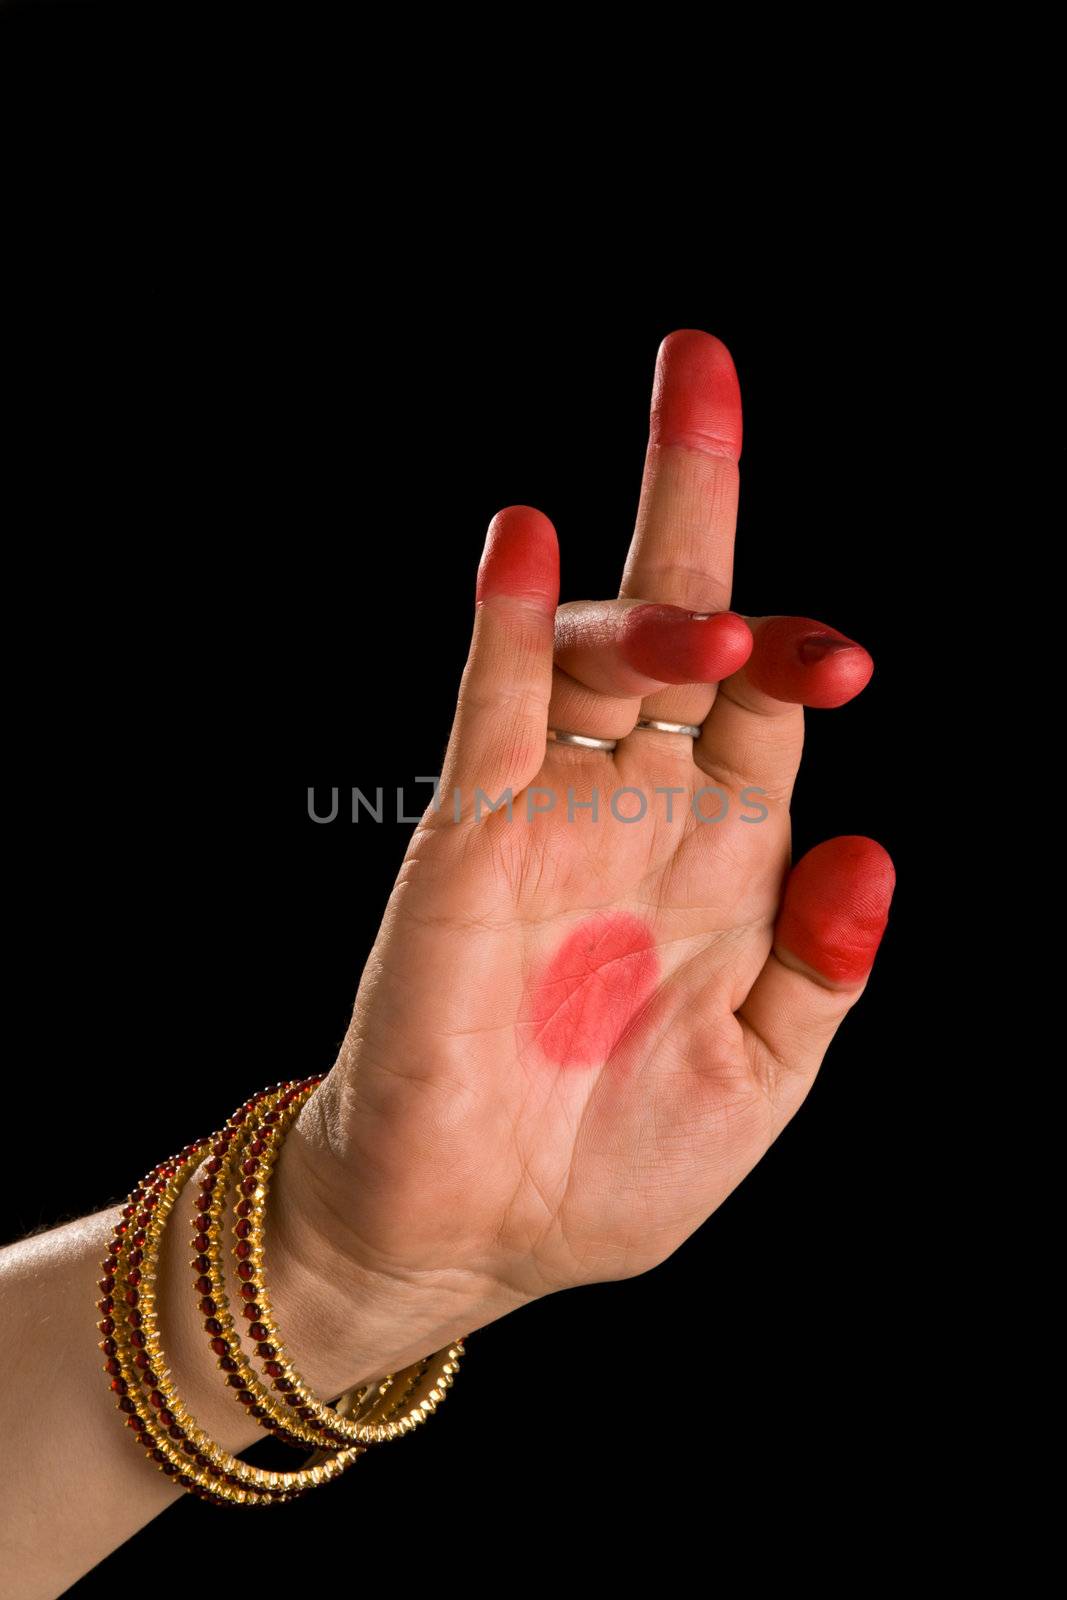 Woman hand showing Schukatunda hasta  (hand gesture, also called mudra)(meaning "Parrot's head") of indian classic dance Bharata Natyam. Also used in Indian dances Odissi and Kuchipudi.